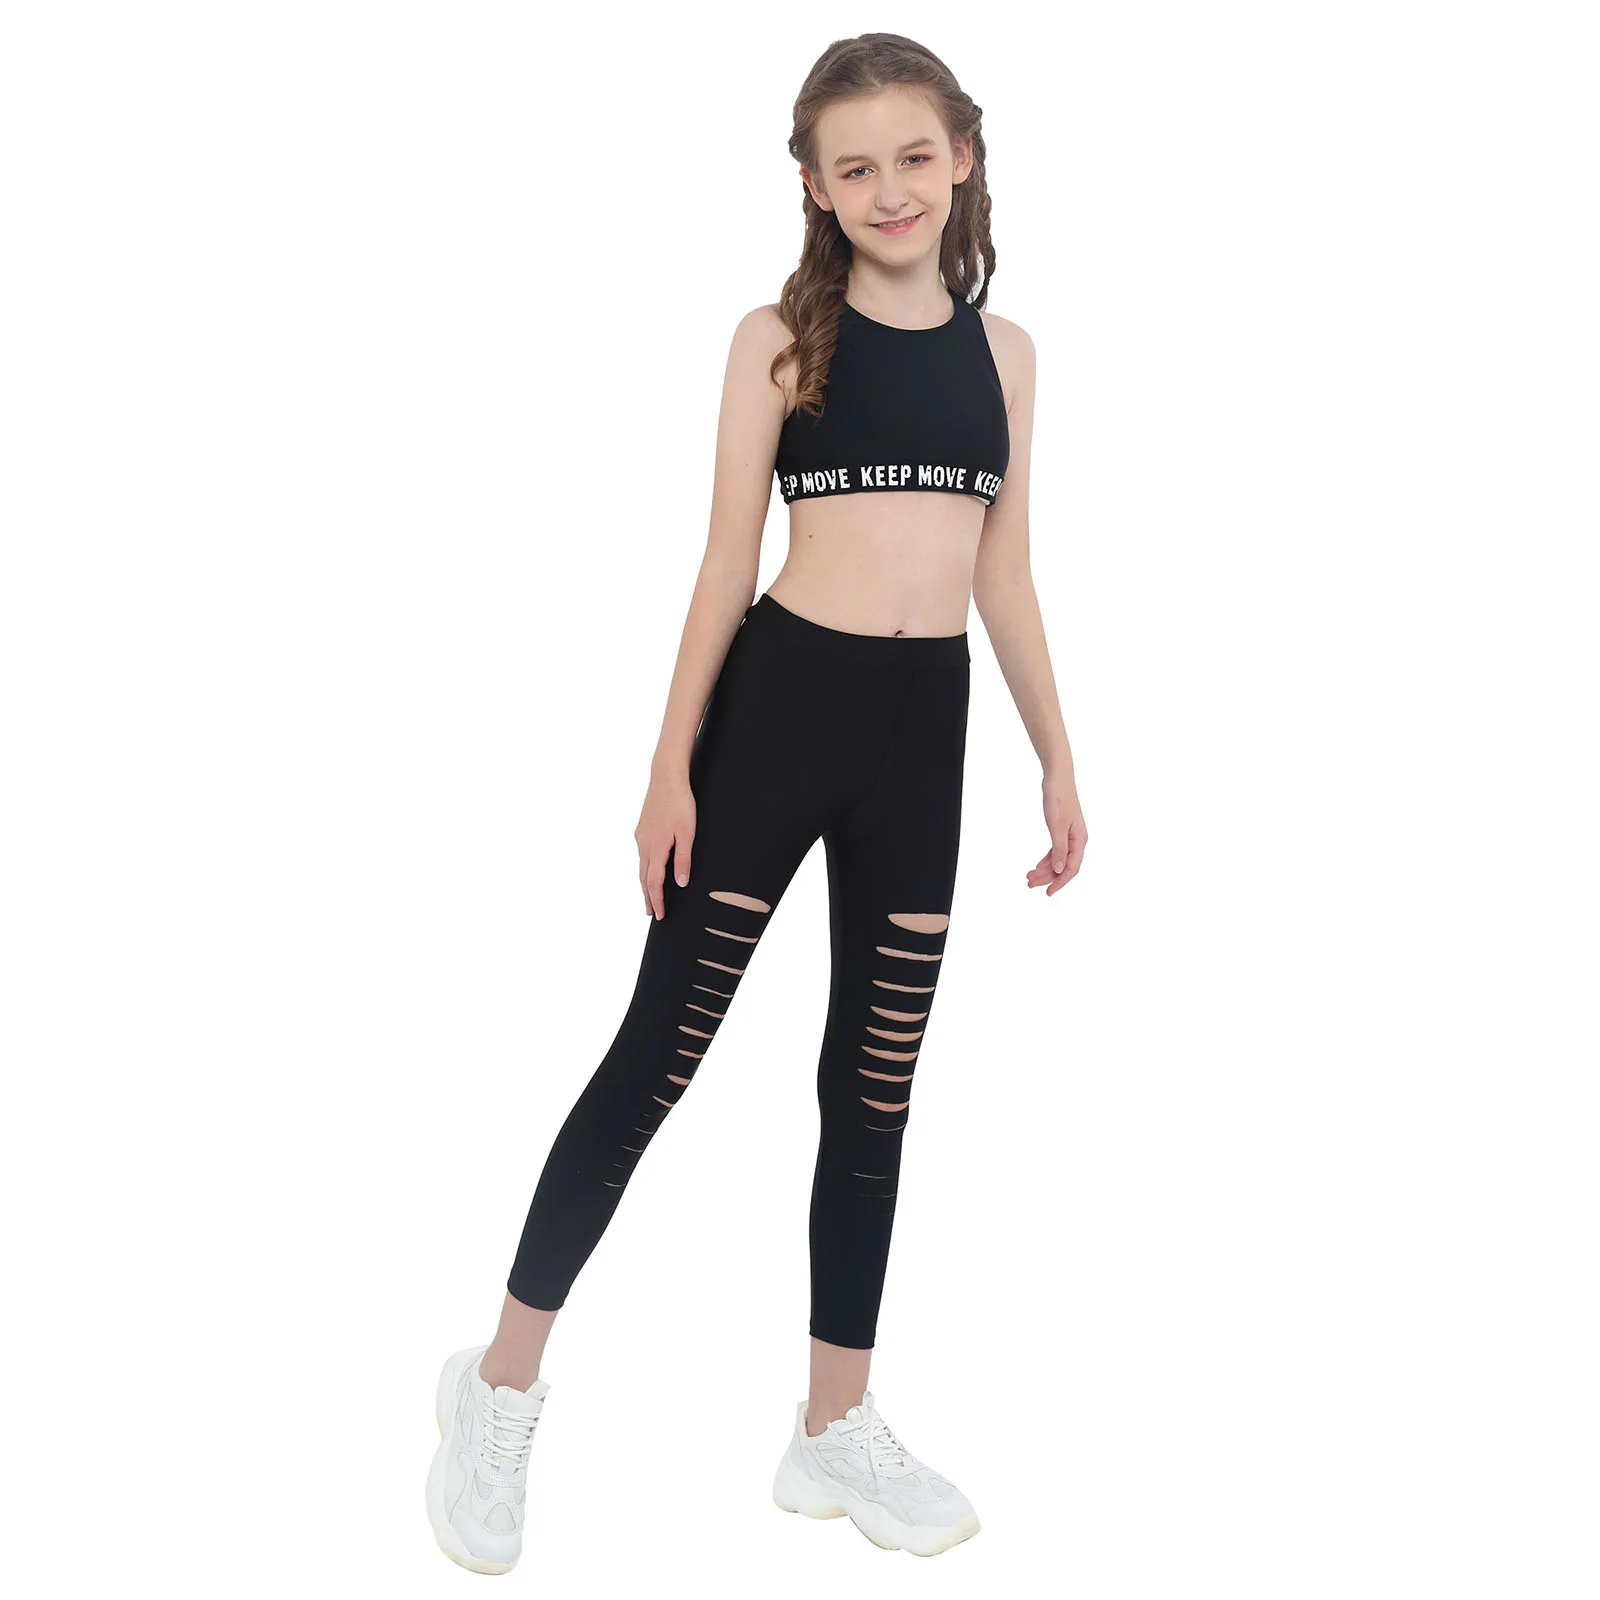 MSemis Kids Girls Crop Tops Athletic Leggings Workout Set 2 Pieces Summer Tracksuit Gym Yoga Dance Sports Outfits Set